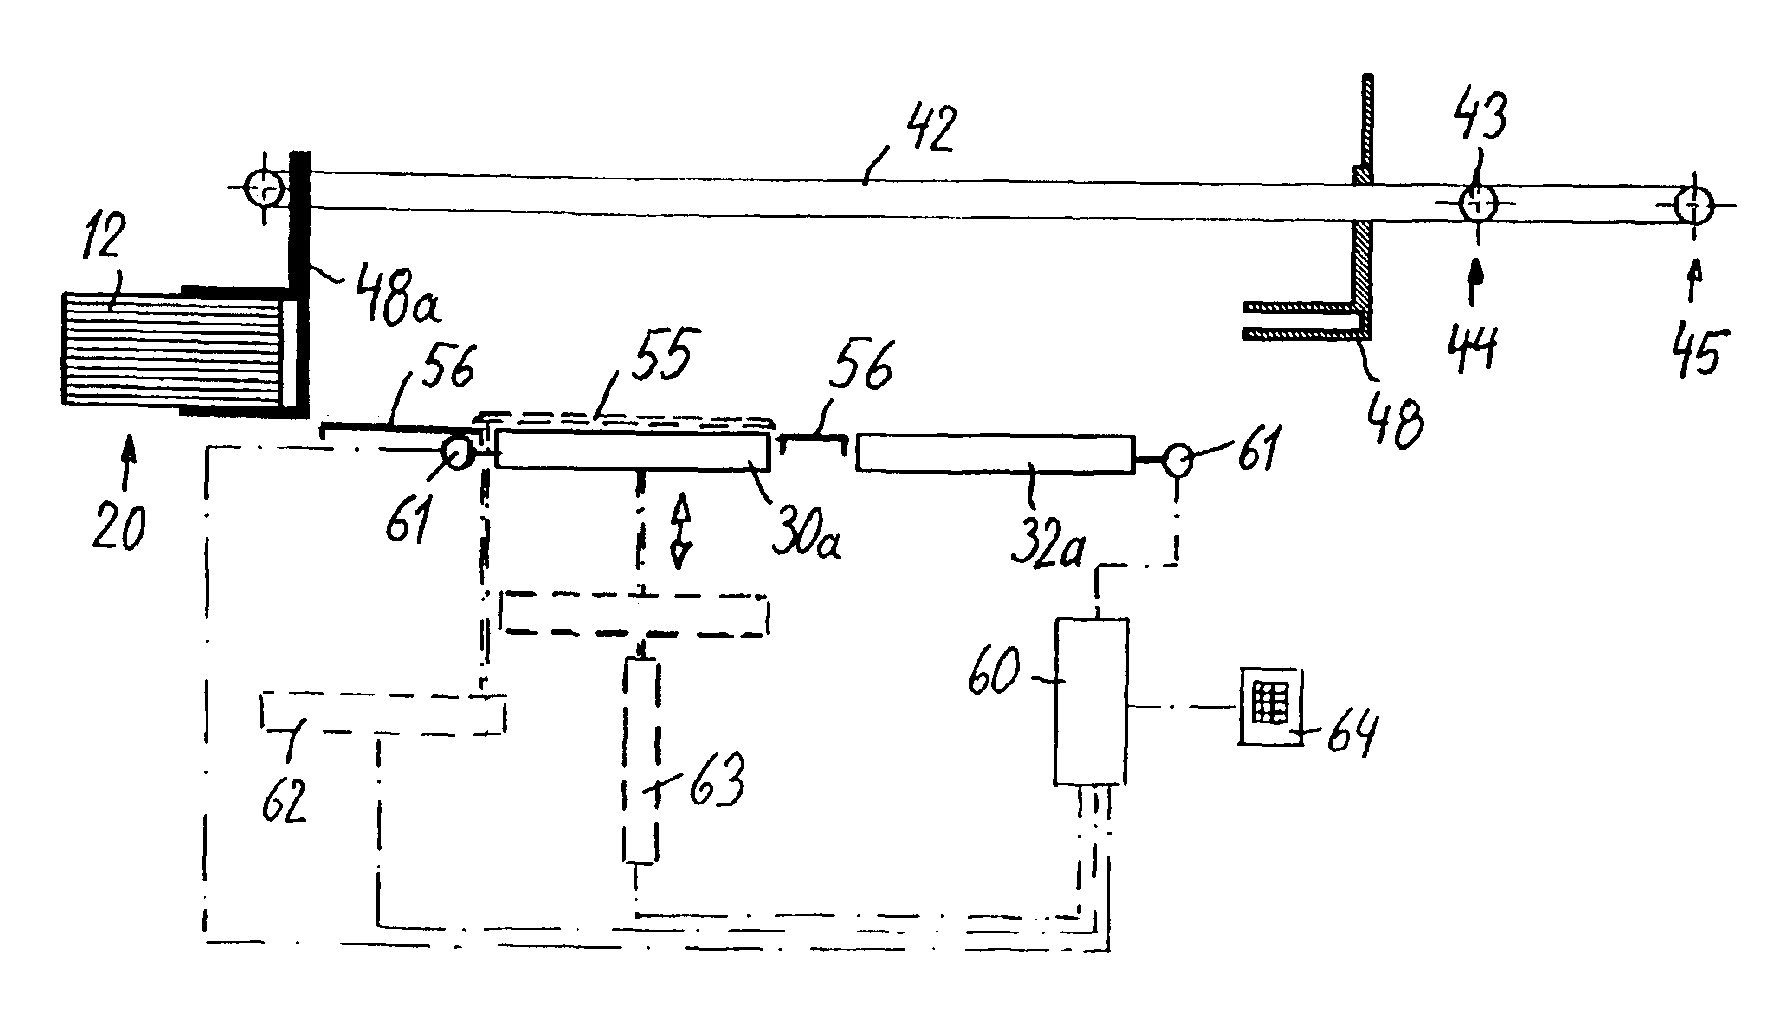 Conveyor system and method for transferring stacks of paper or the like to a discharge conveyor